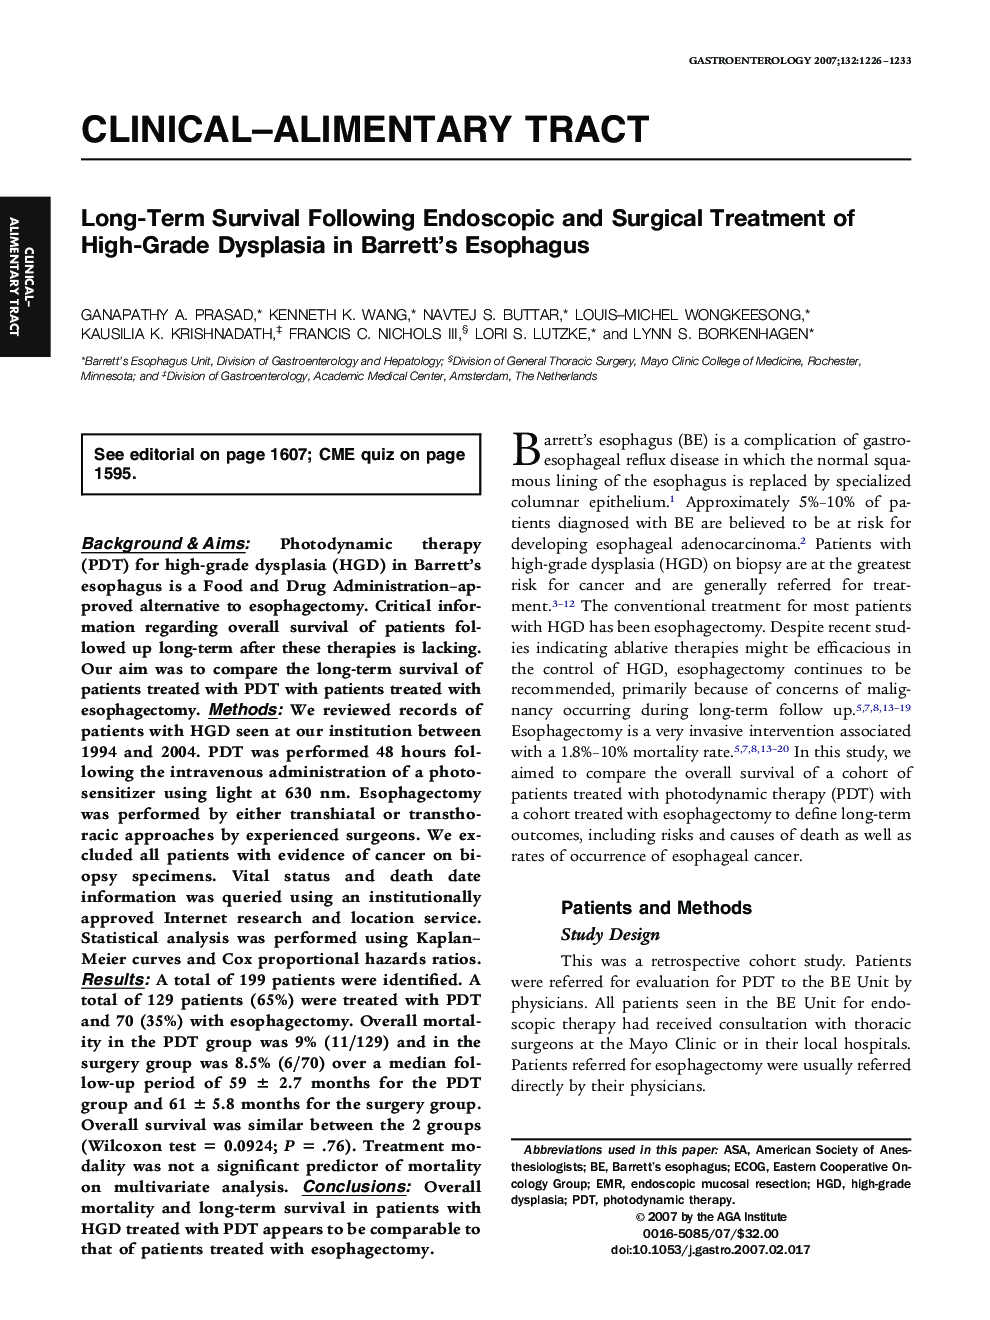 Long-Term Survival Following Endoscopic and Surgical Treatment of High-Grade Dysplasia in Barrett’s Esophagus 